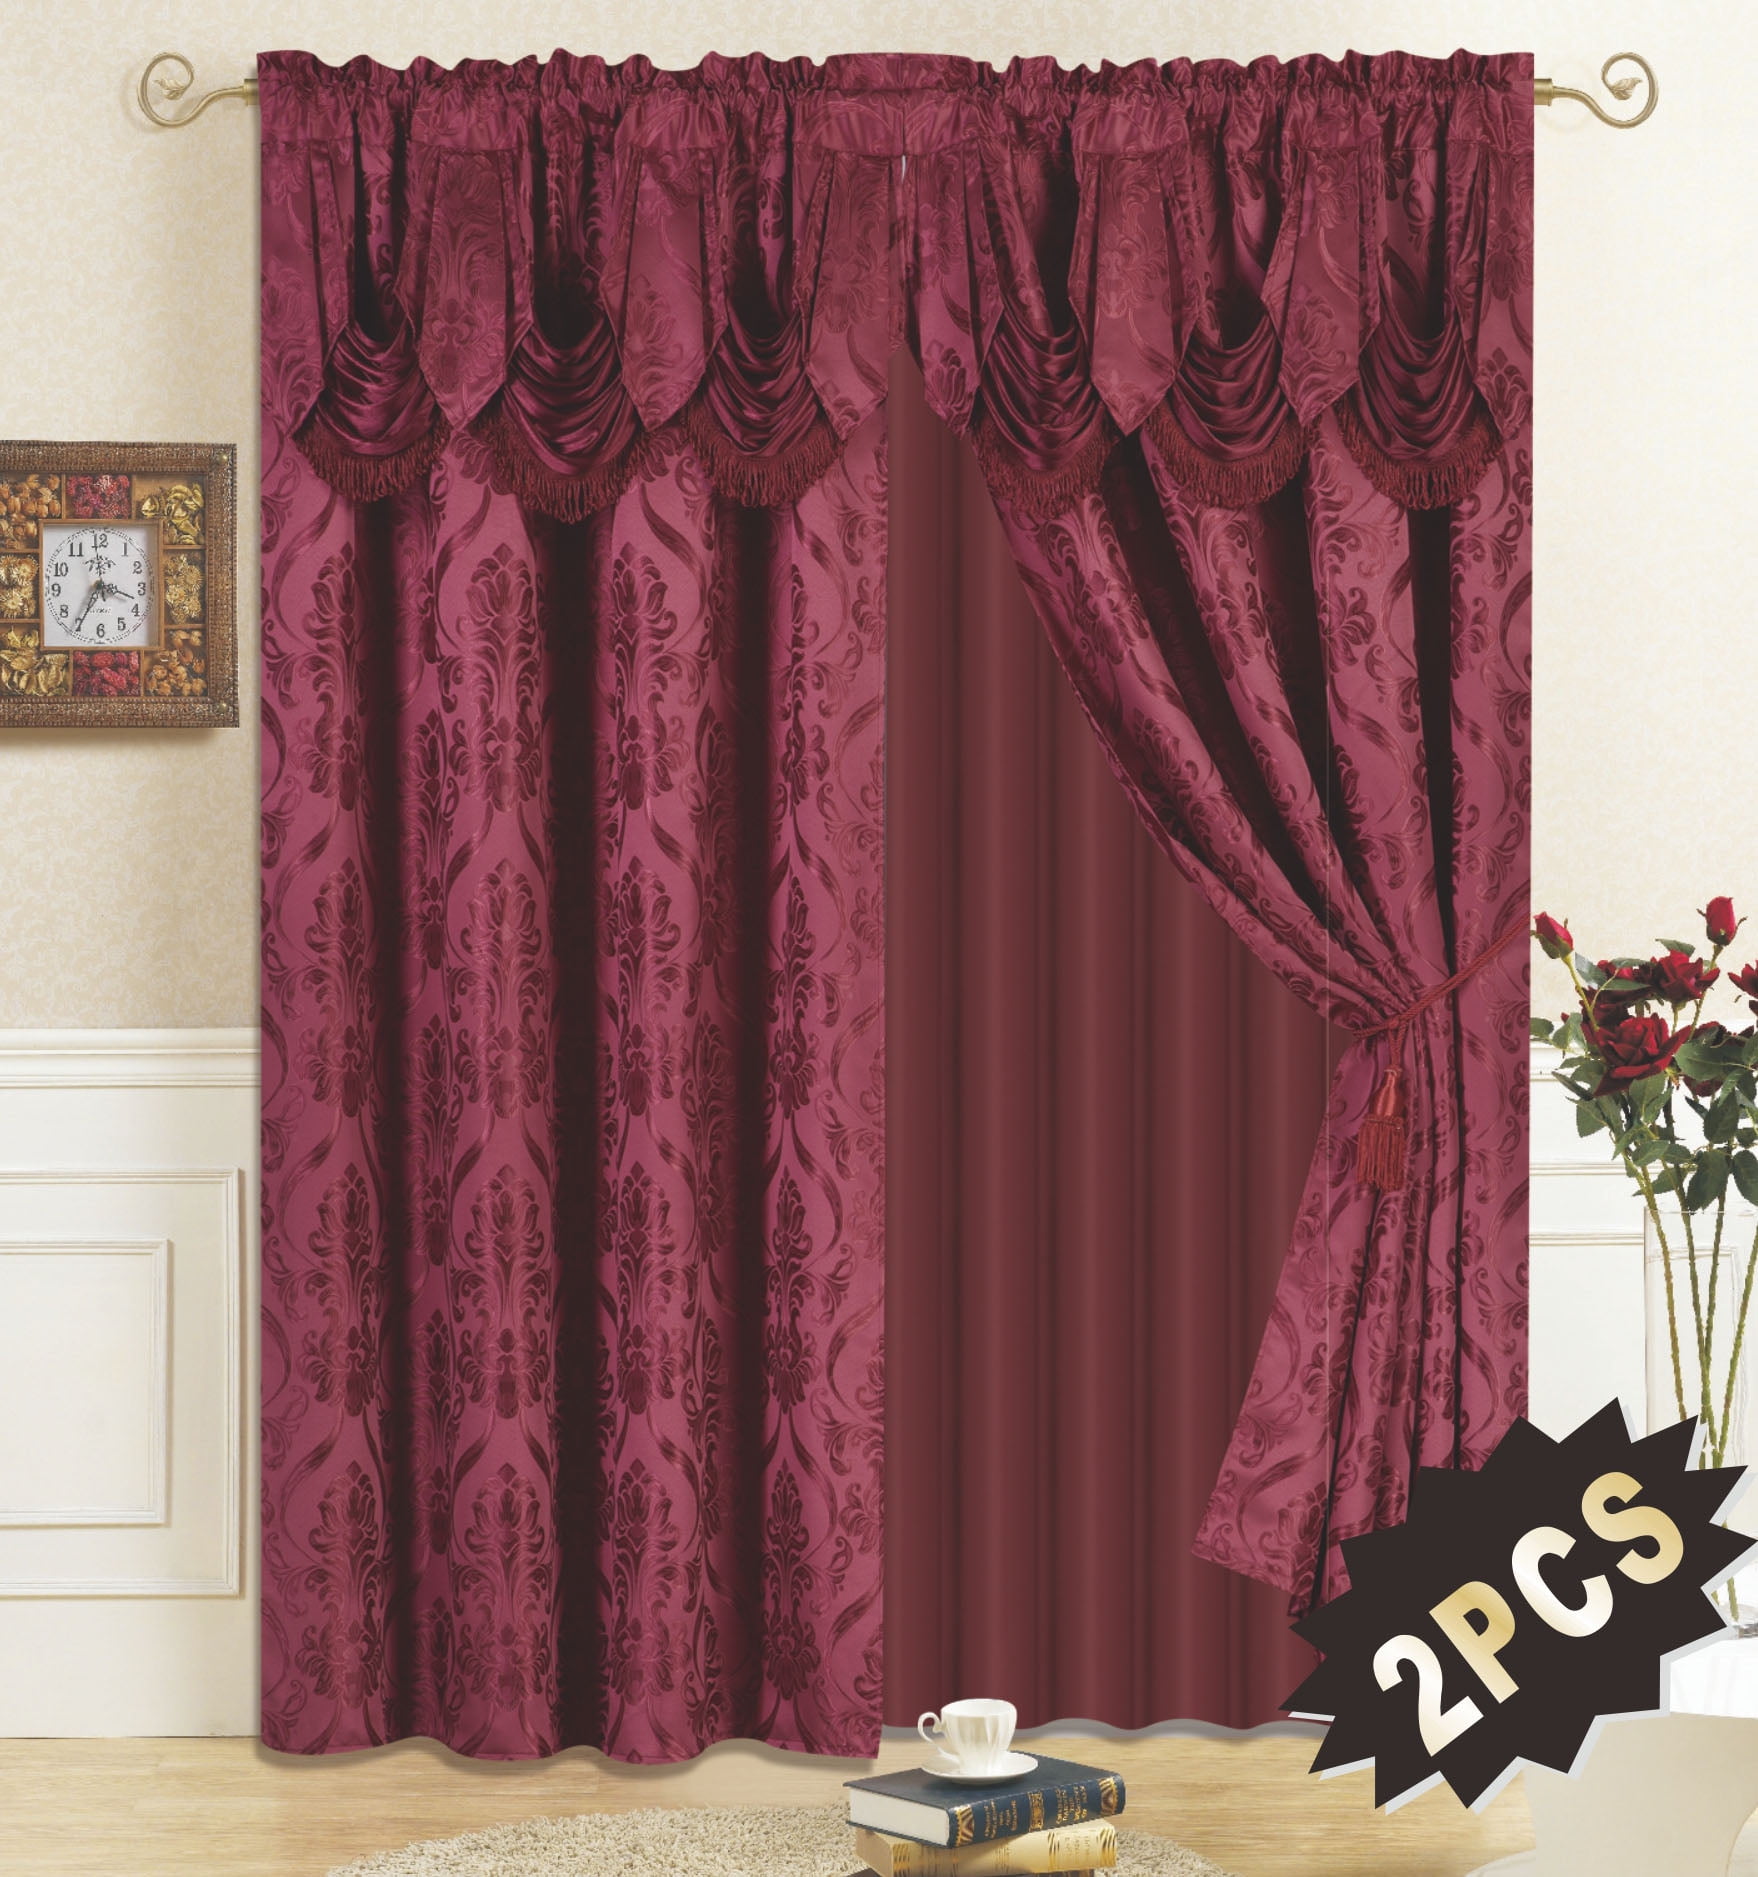 All American Collection New 4 Piece Drape Set with Attached Valance and ...